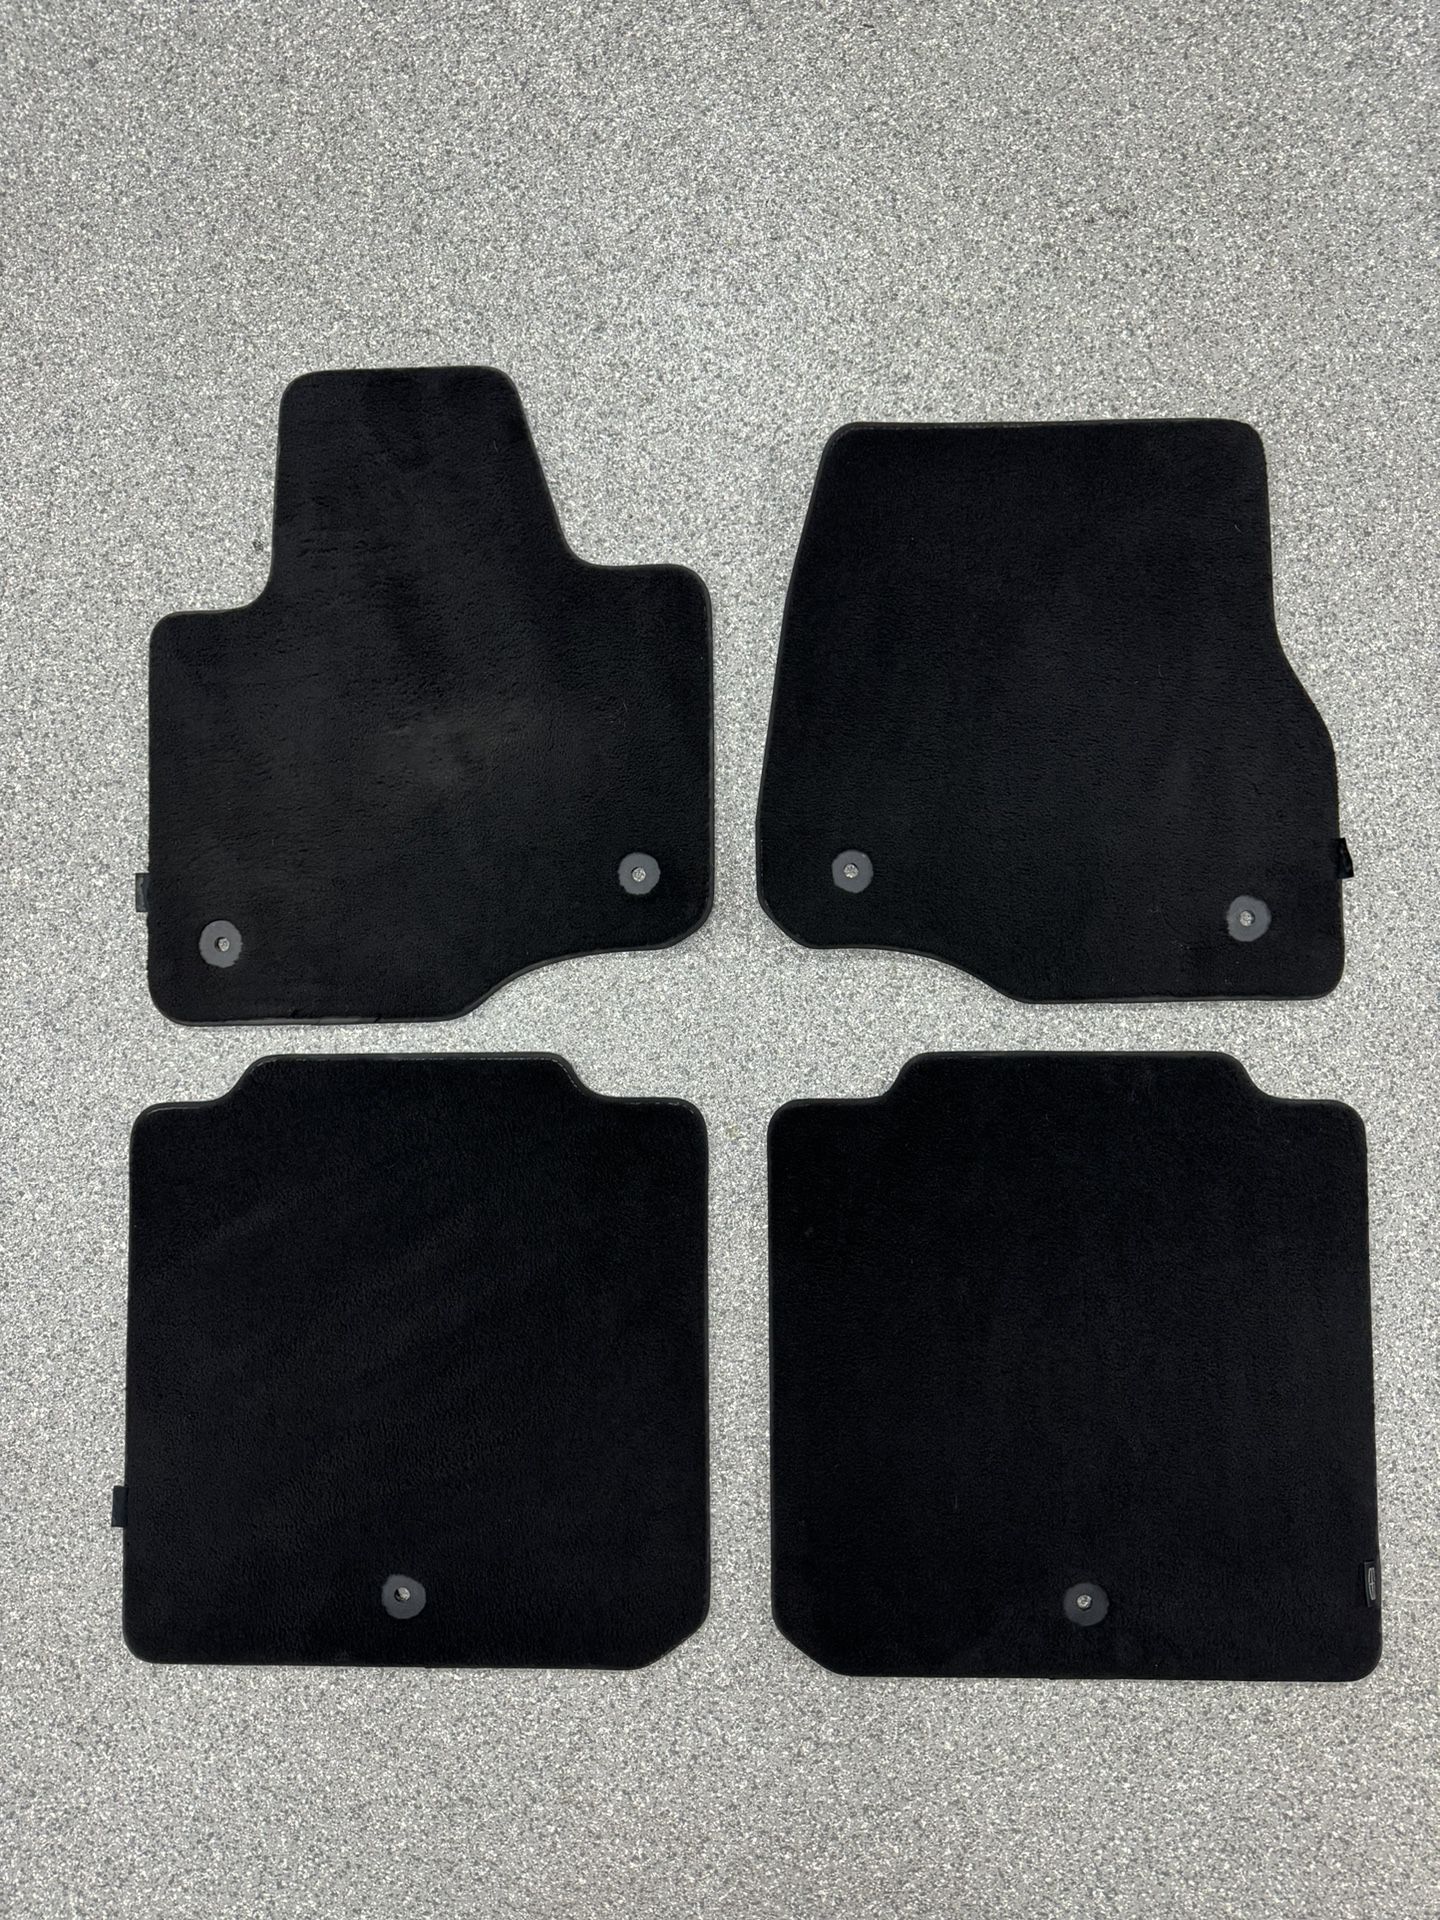 Genuine Lincoln Navigator Floor Mats. Great condition. Black in color and will fit 2018 - 2024 Navigator and Ford Expedition.